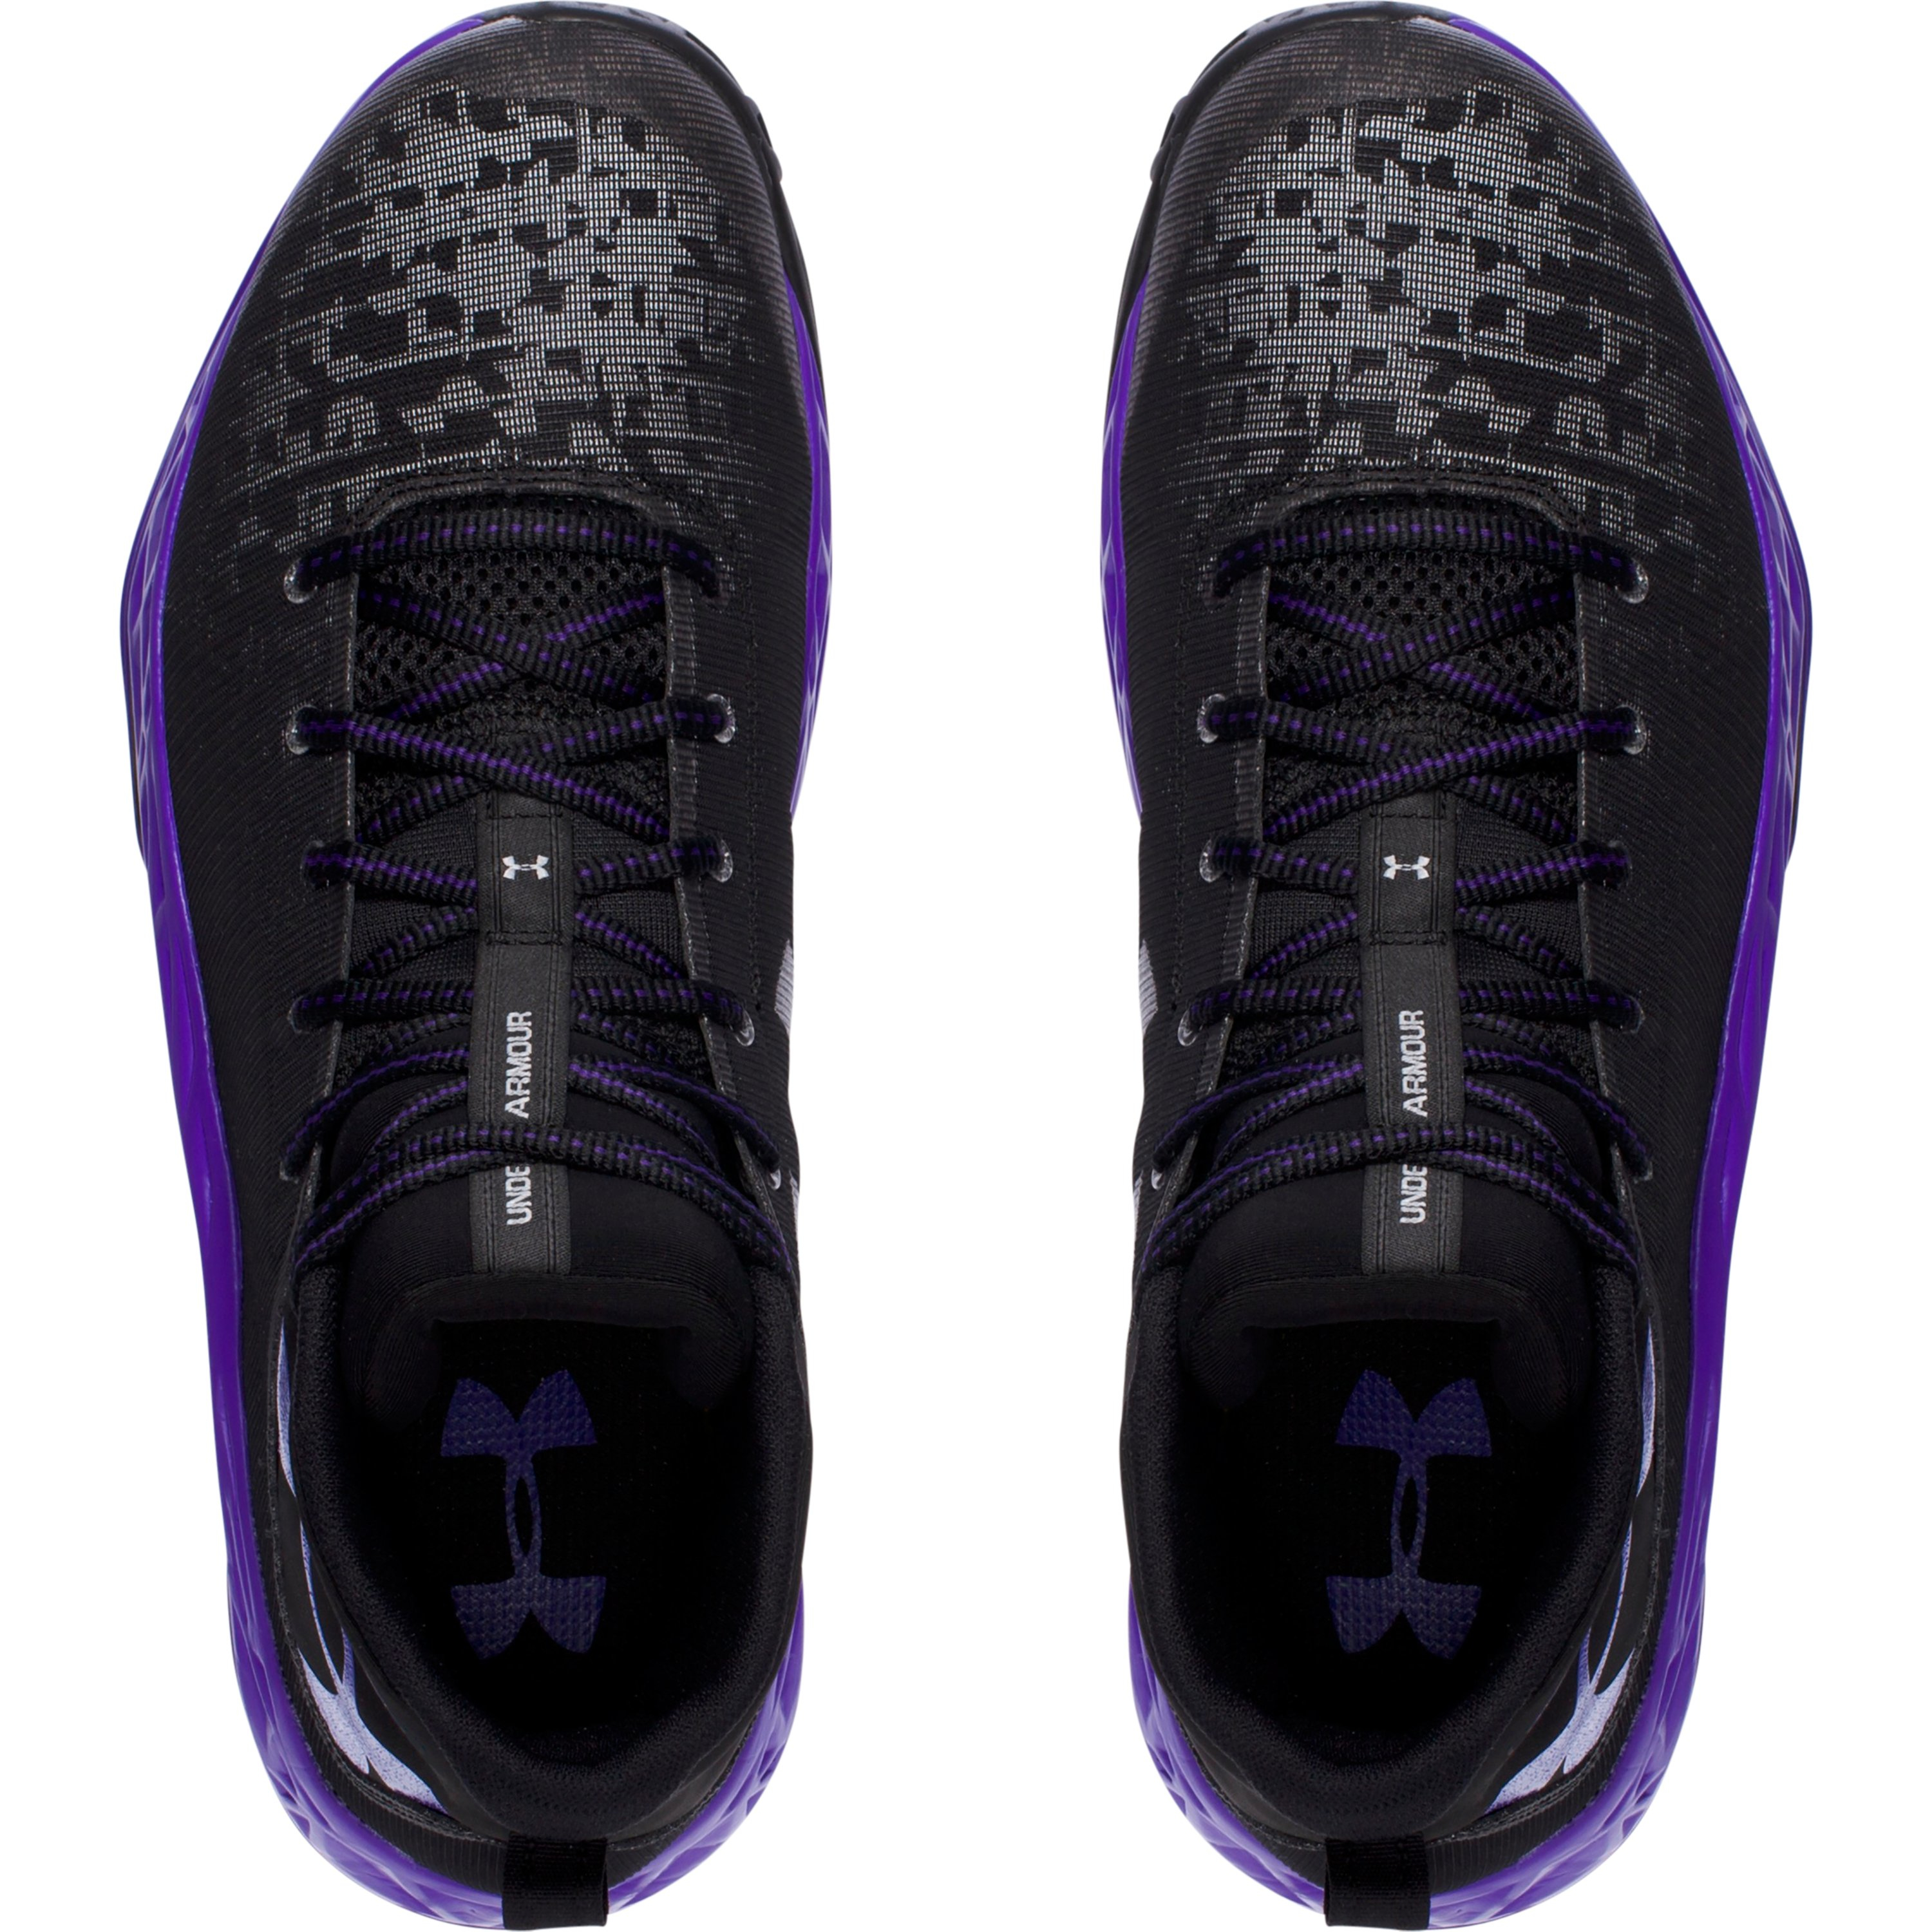 Lyst Under Armour Men's Ua Fireshot Basketball Shoes in